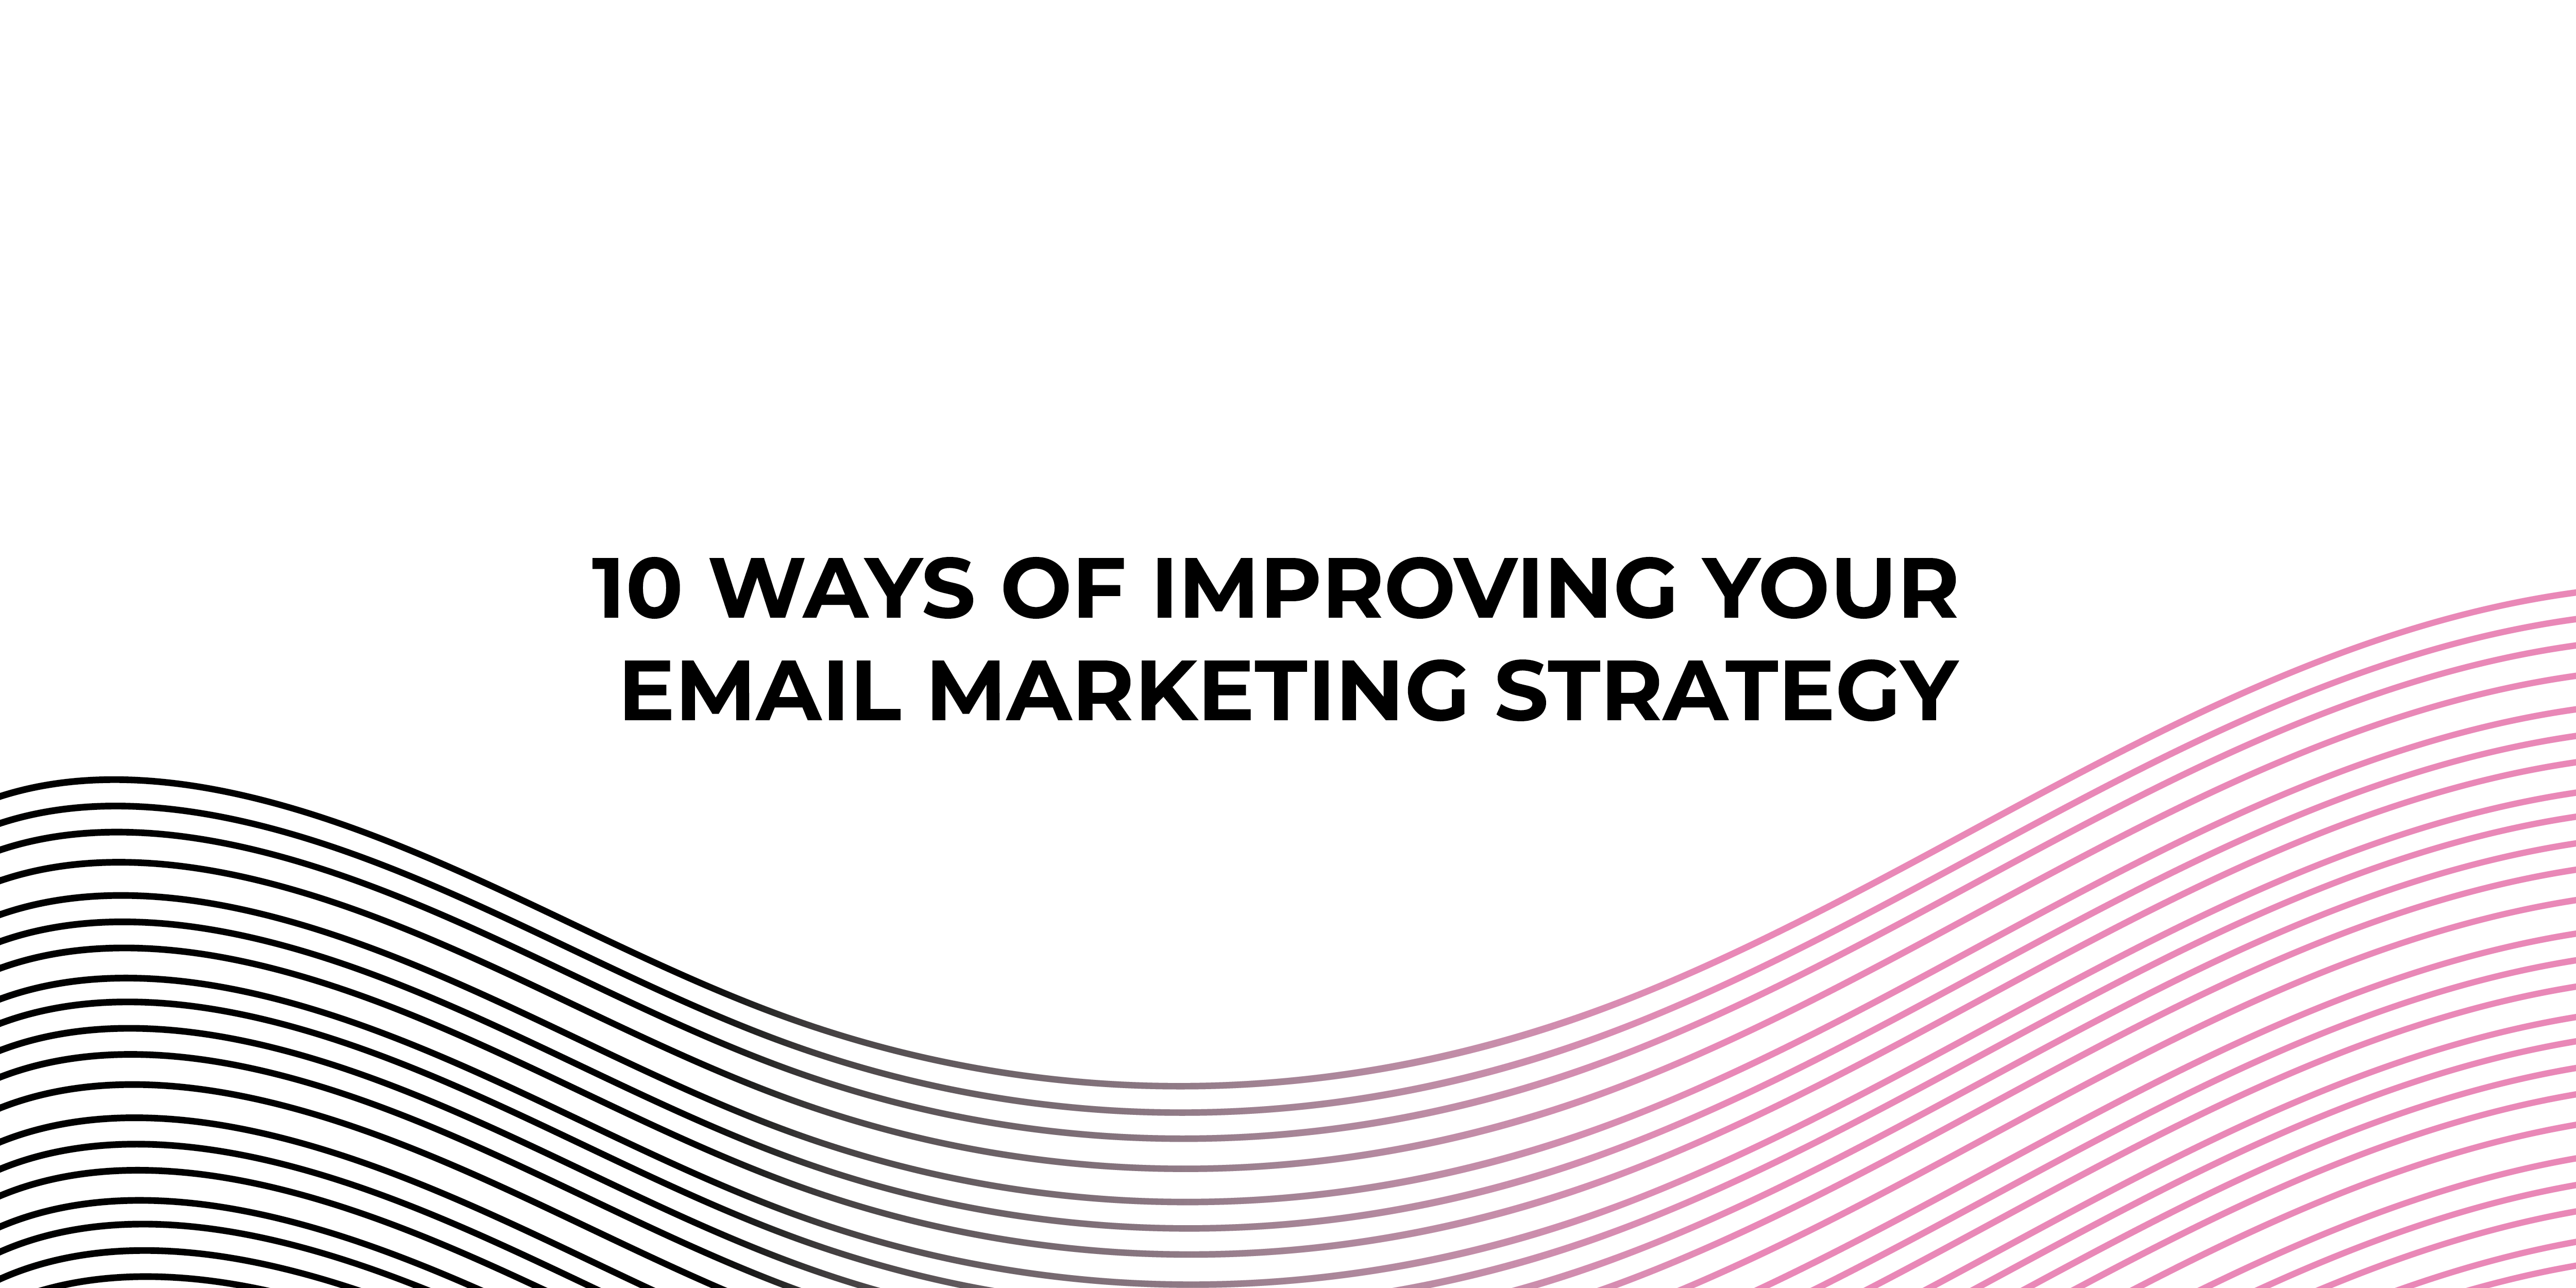 Inboxx | 10 Ways of Improving Your Email Marketing Strategy